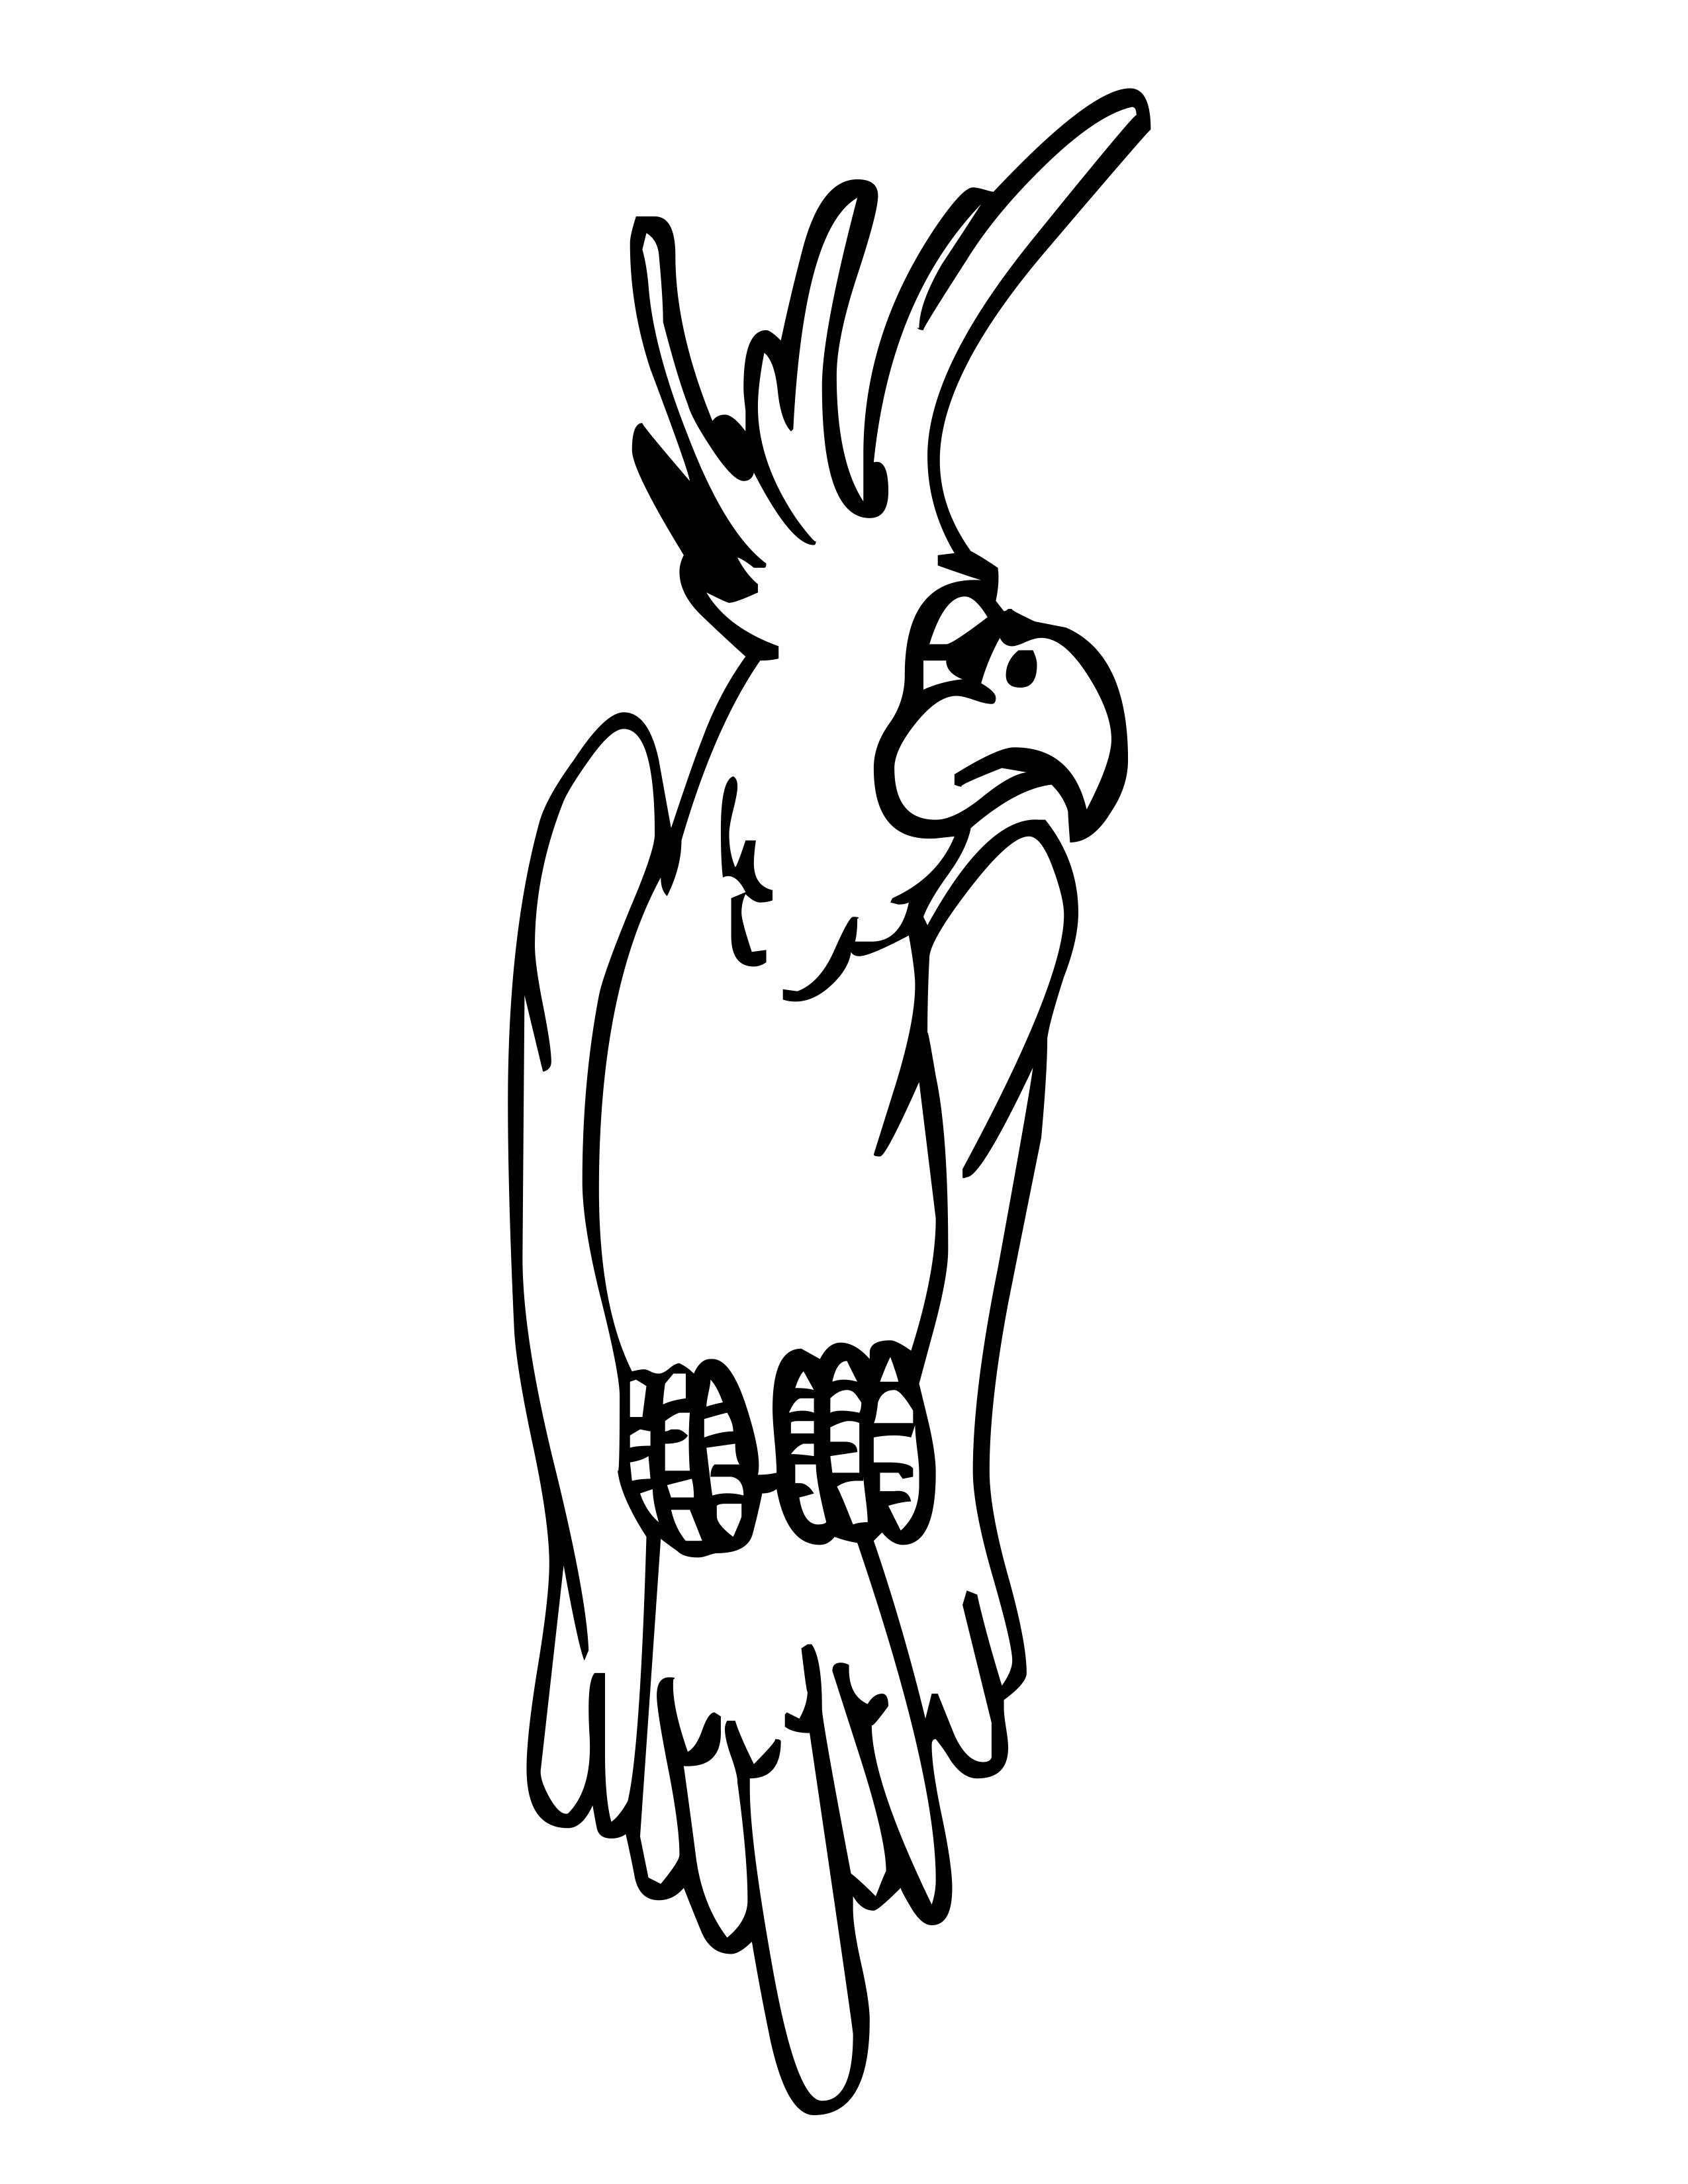 Coloring Page Of Bird Flying | Coloring Page Blog